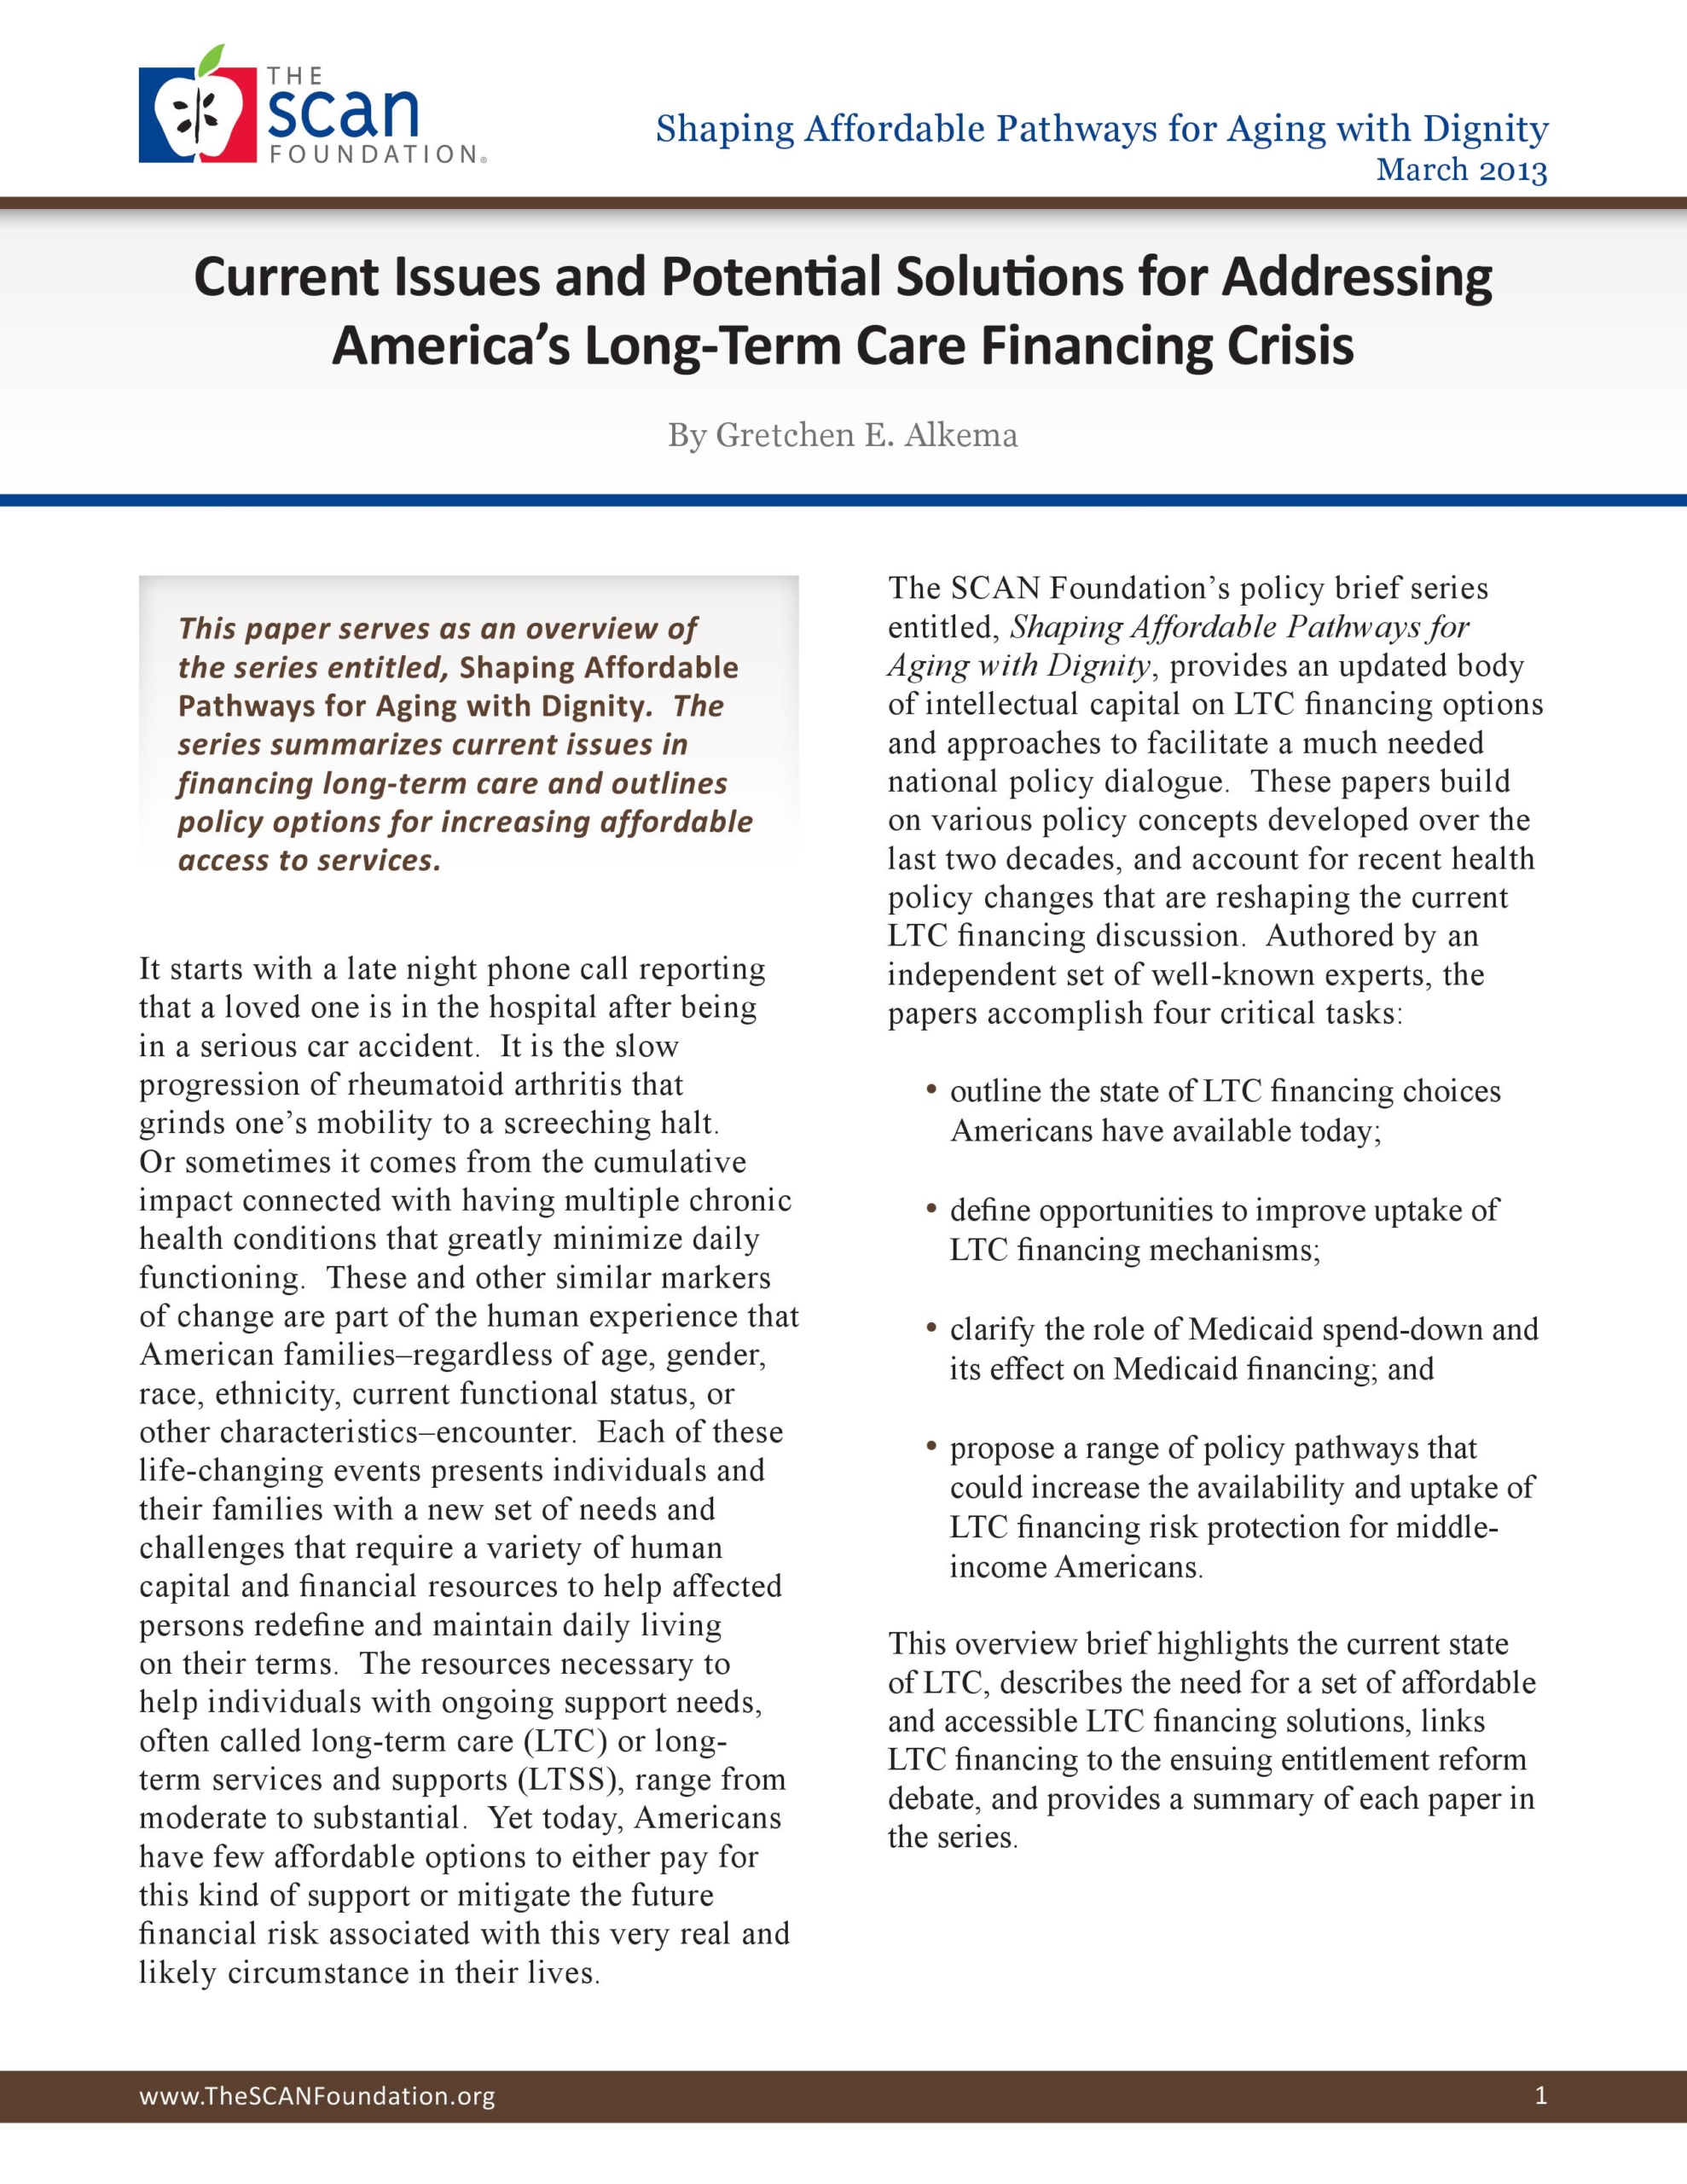 Current Issues and Potential Solutions for Addressing America’s Long-Term Care Financing Crisis